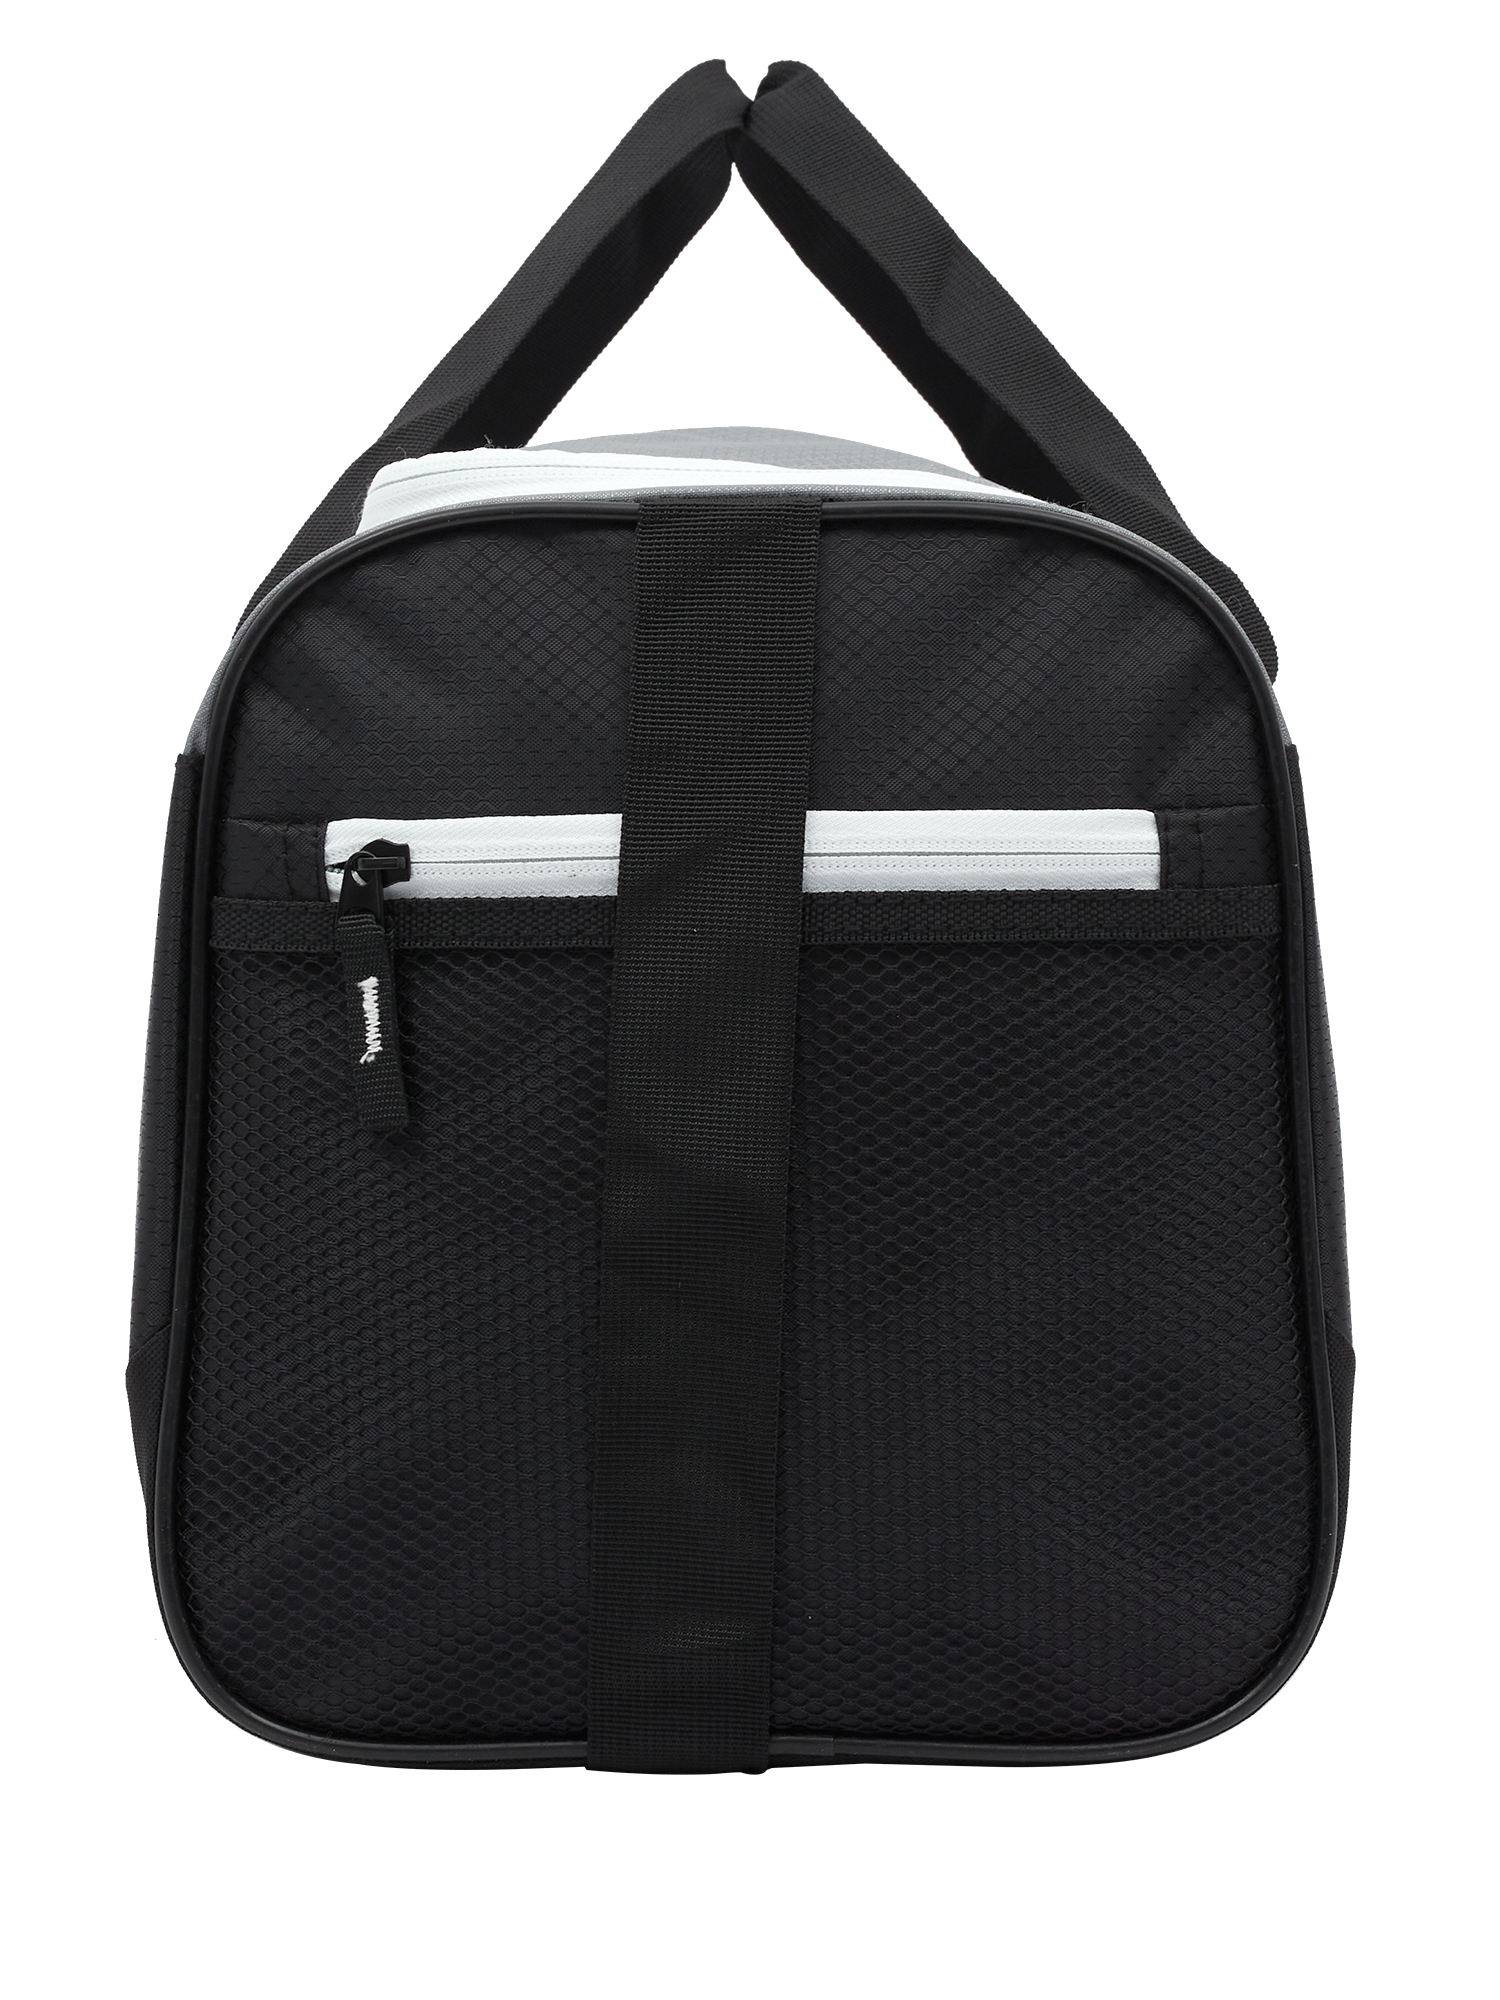 Protege 18" Polyester Sport Duffel - Black - image 3 of 10